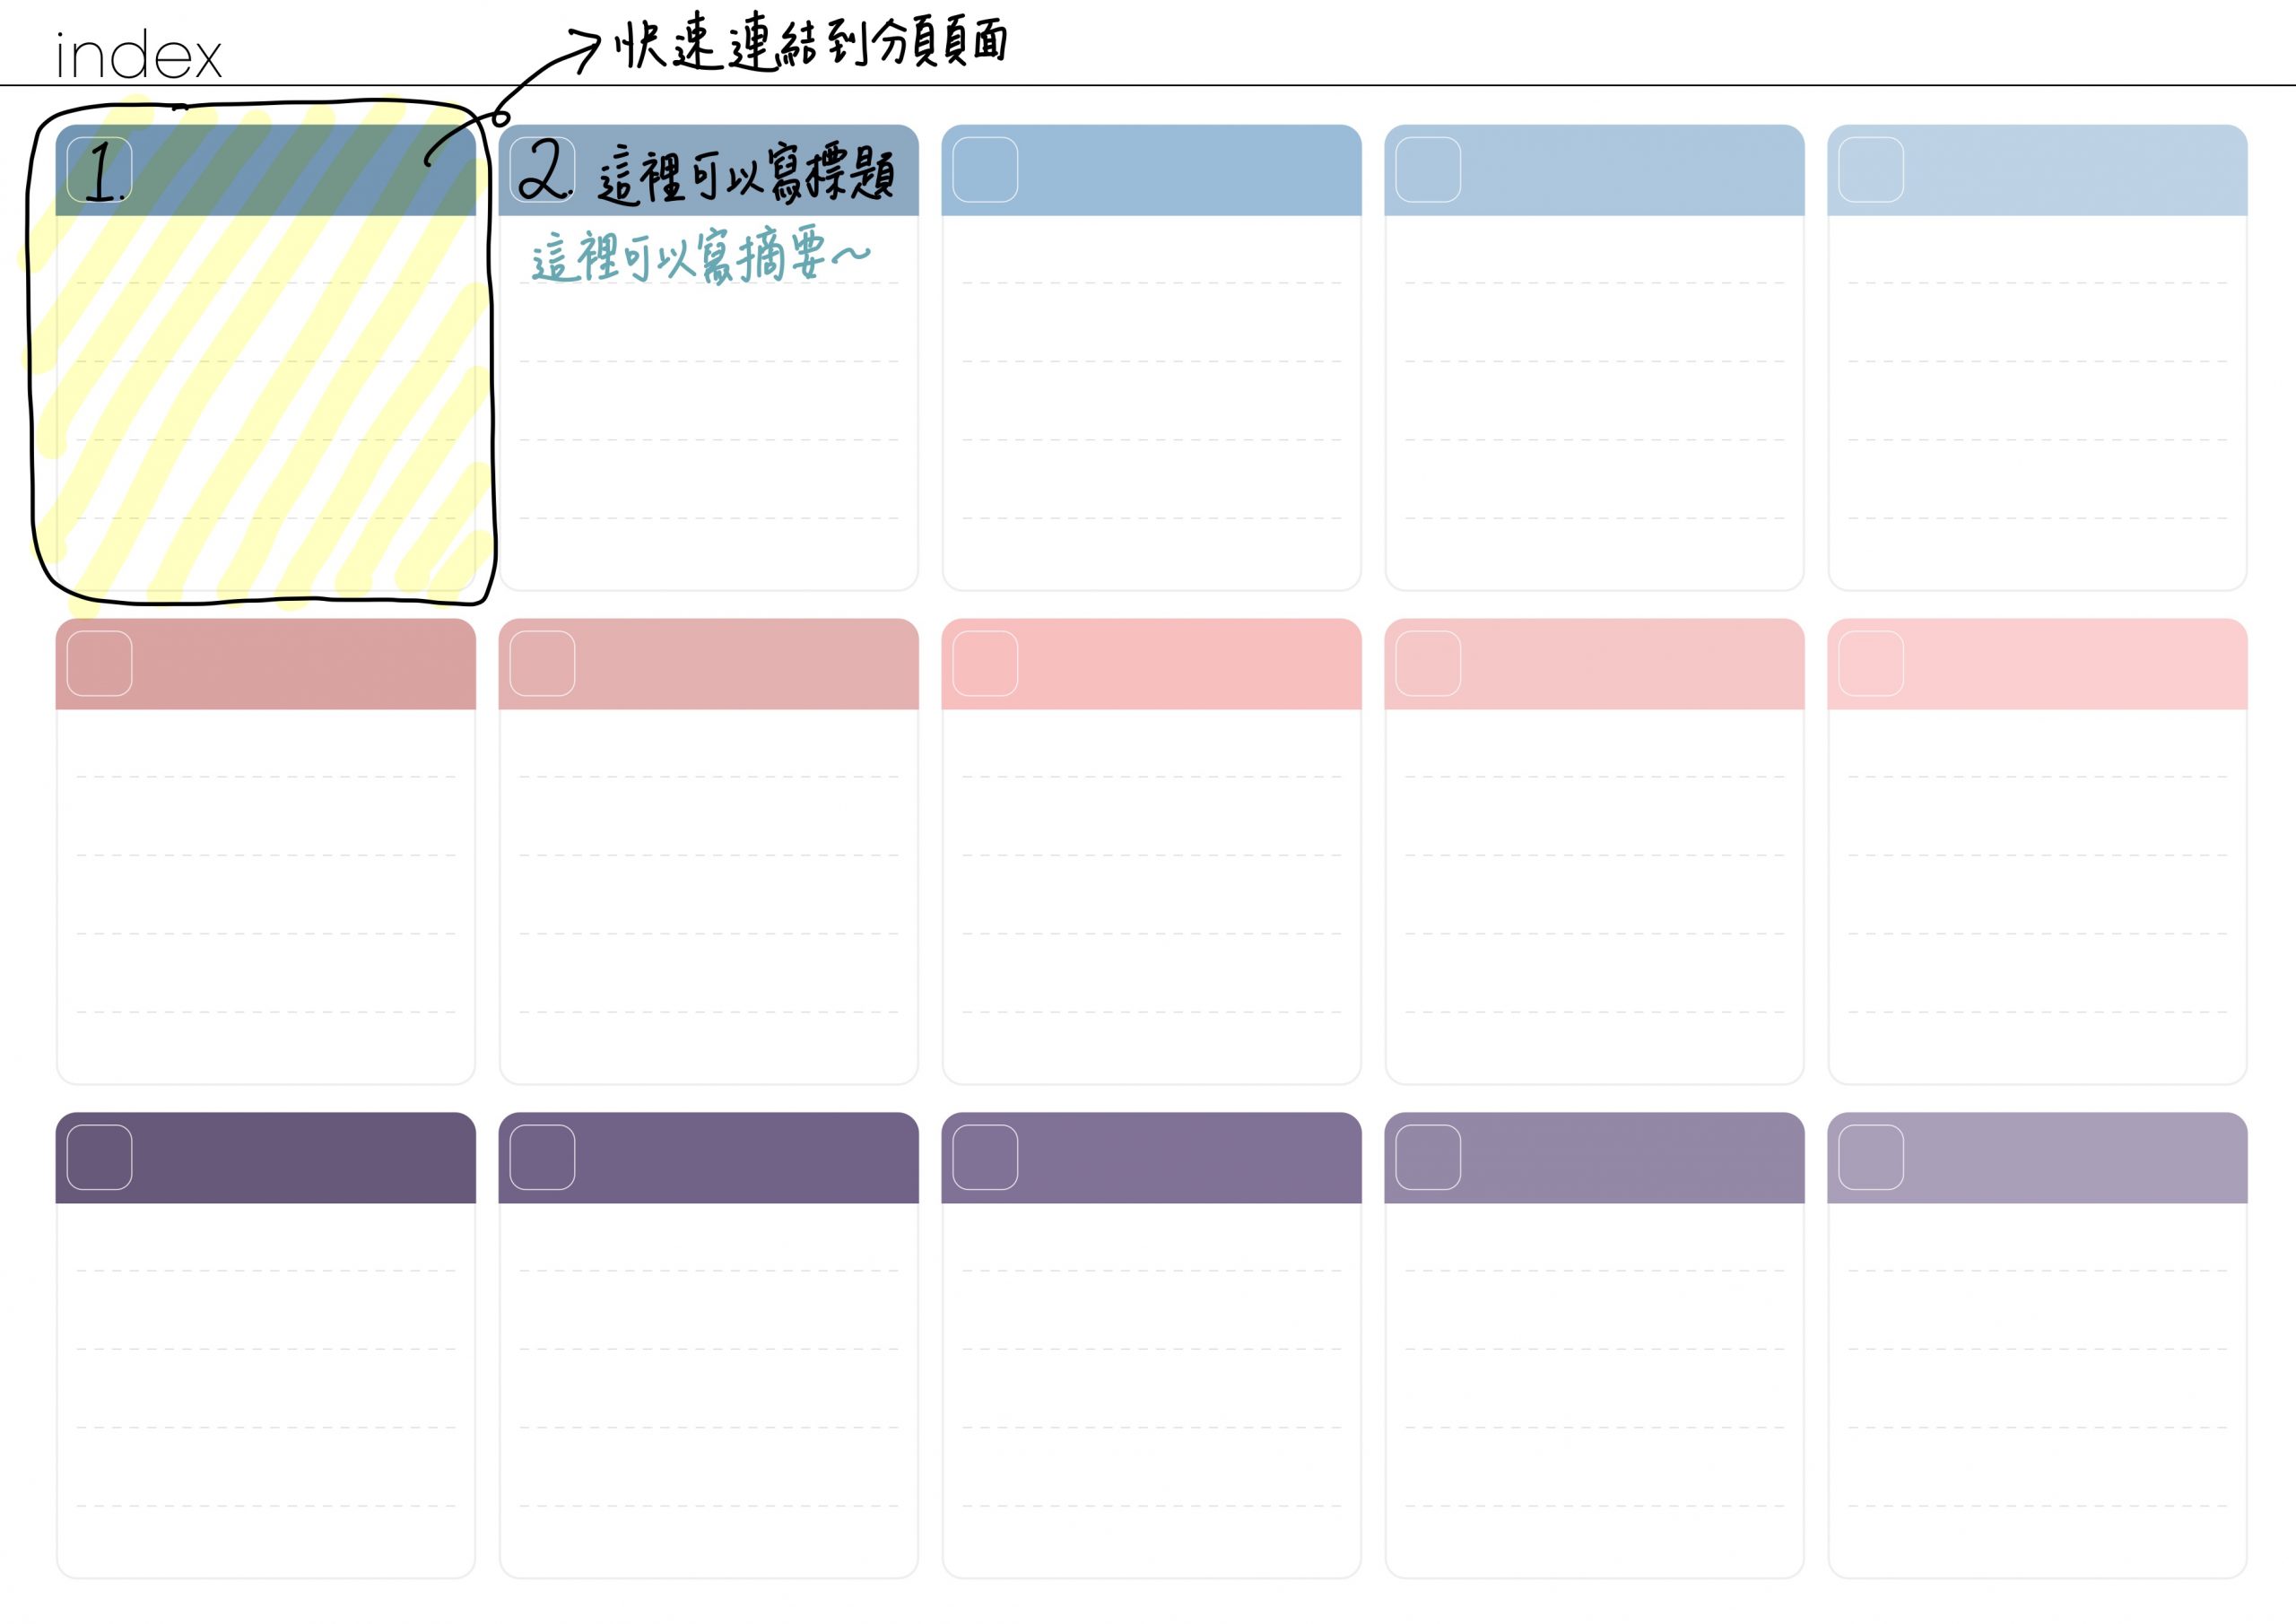 Notebook-Landscape-Solid Color Cover-15 Tabs-Dawn In The Morning Fog-White Mode 索引手寫說明 | me.Learning